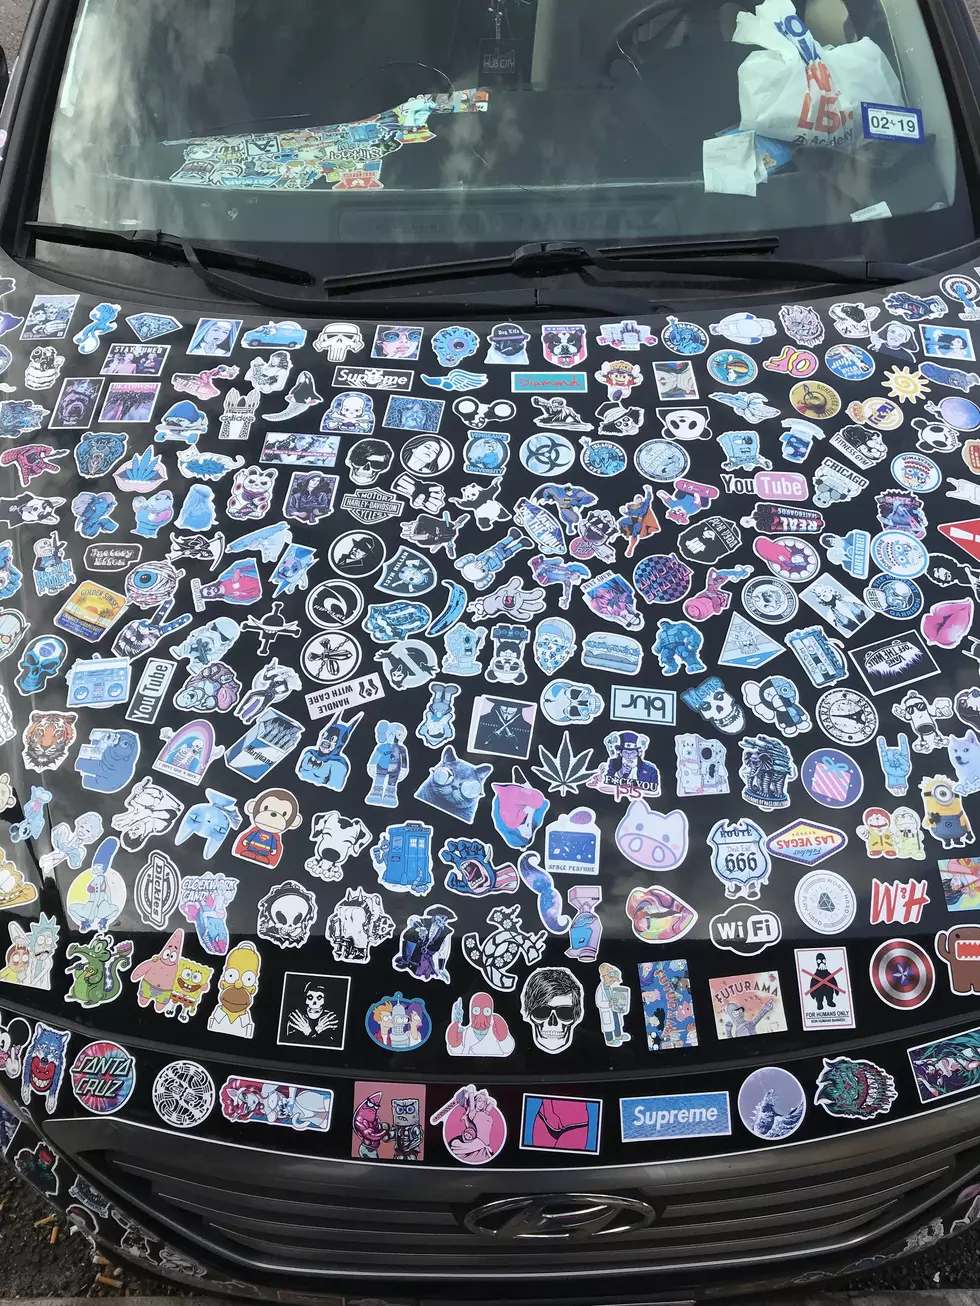 This Lubbock Man’s Car Is Completely Covered in Stickers [Pictures]